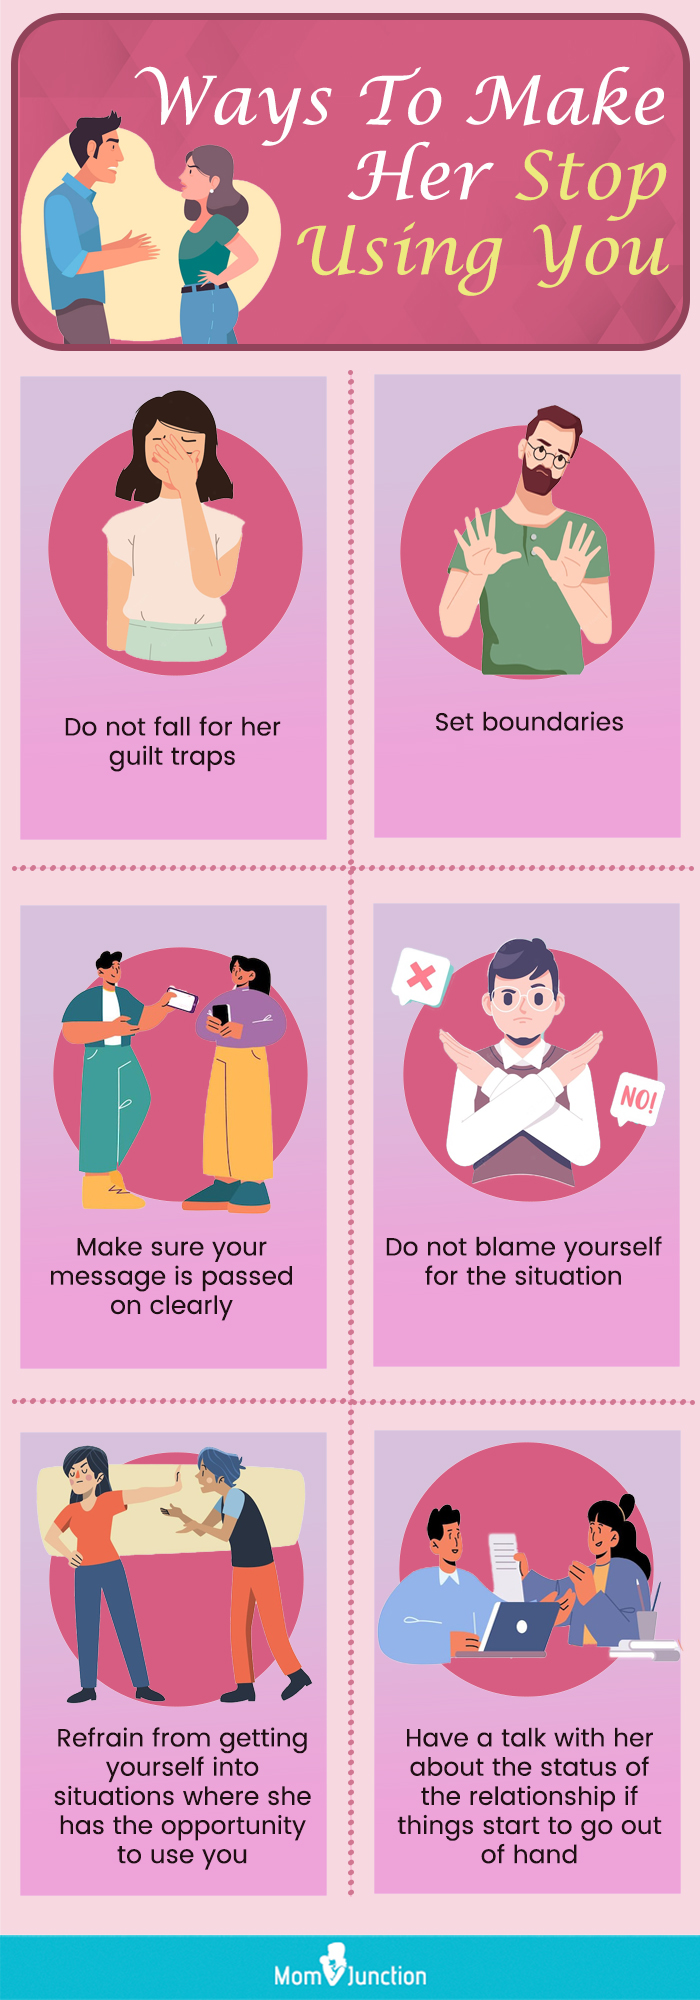 ways to make her stop using you [infographic]